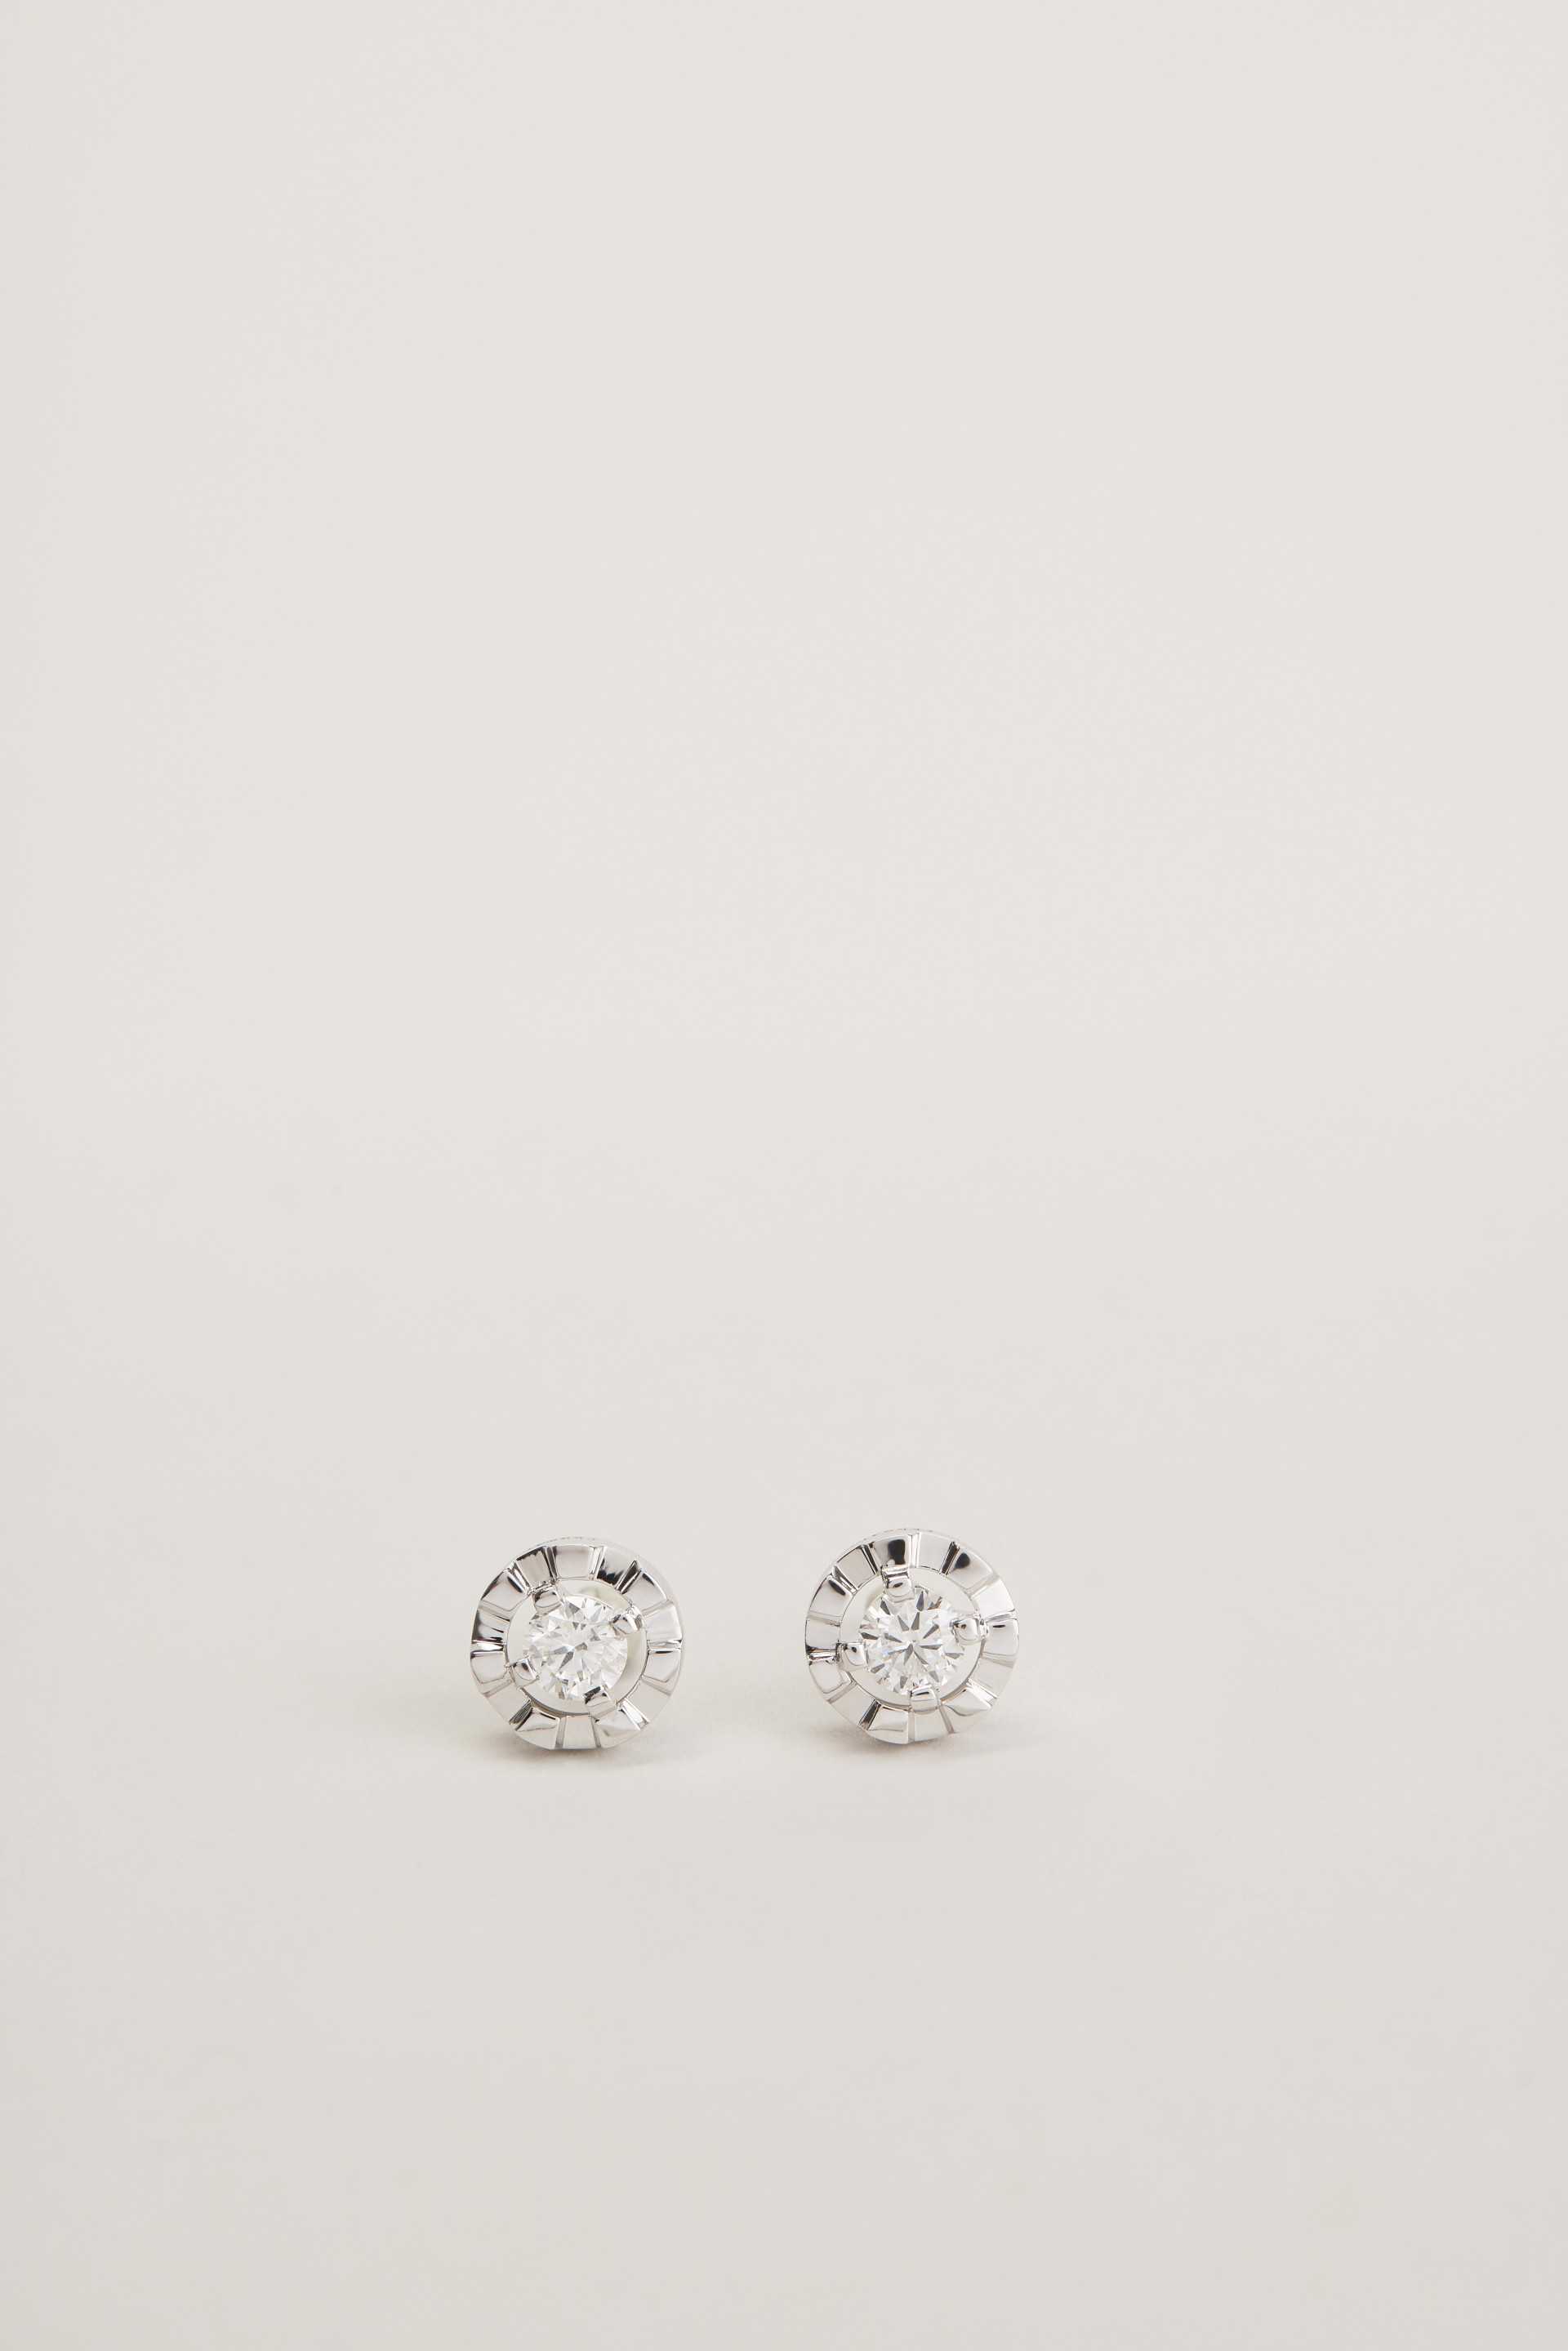 Paris White Gold Solitaire Earring